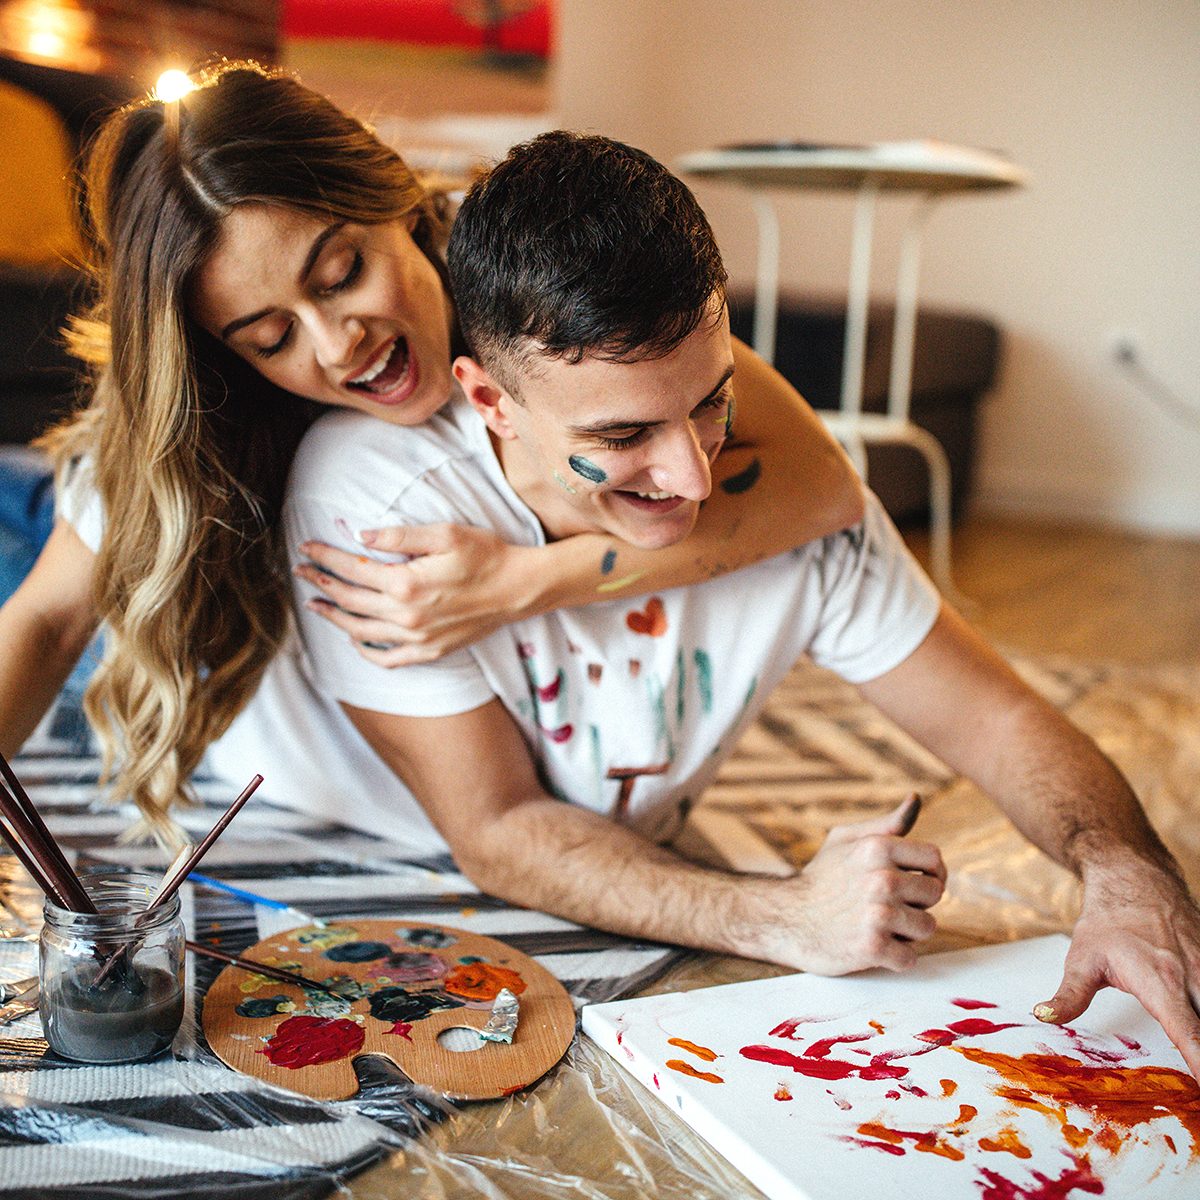 Couple having fun at home, painting on canvas